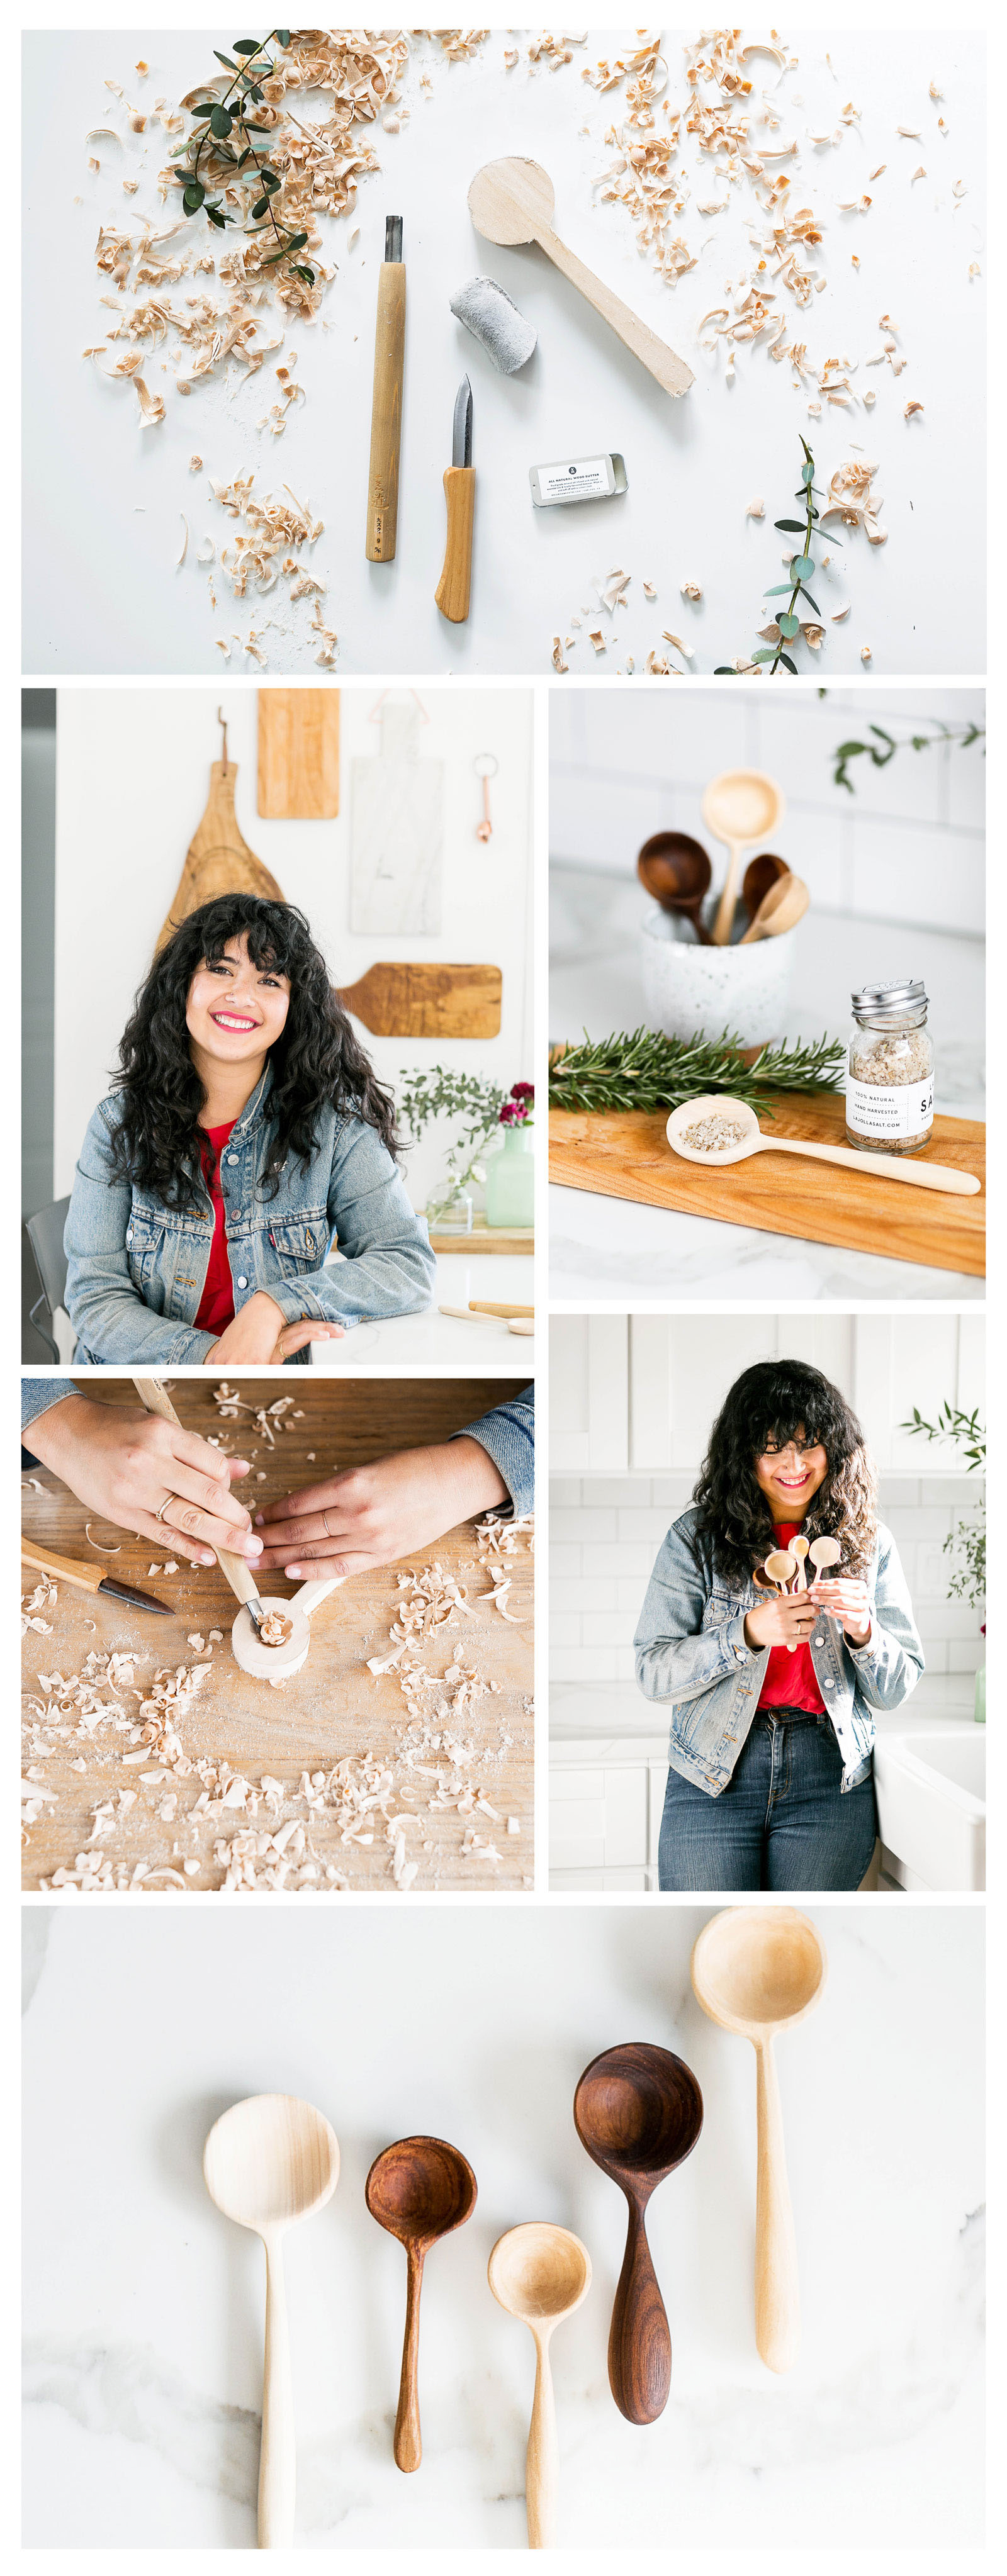 Carved Wooden Spoons | Melanie Abrantes | The Crafter's Box